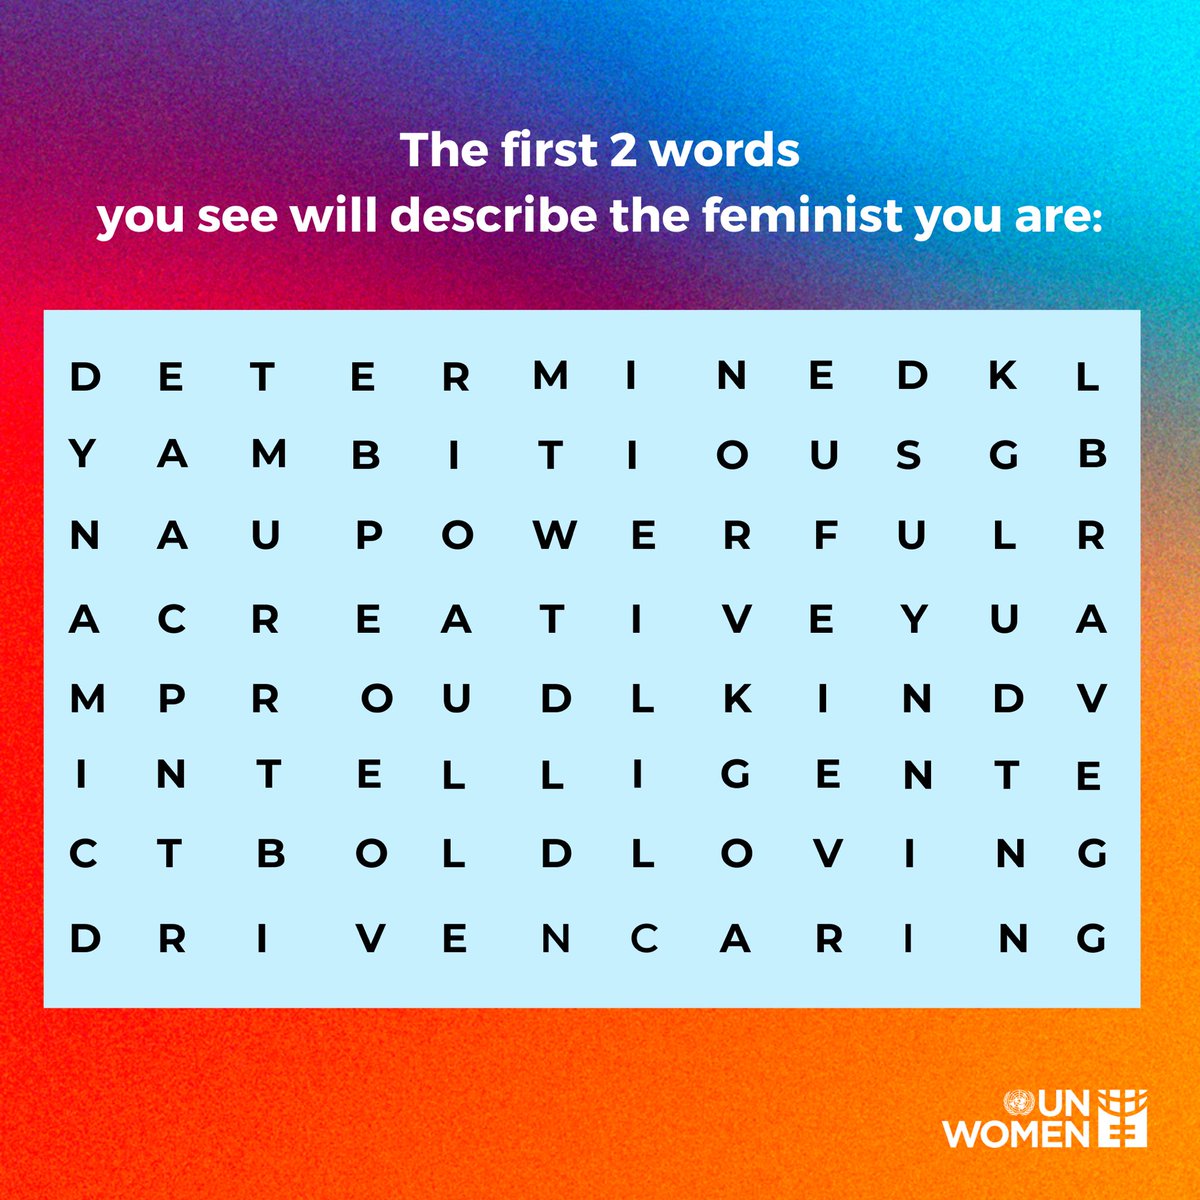 What words describe you on our grid?